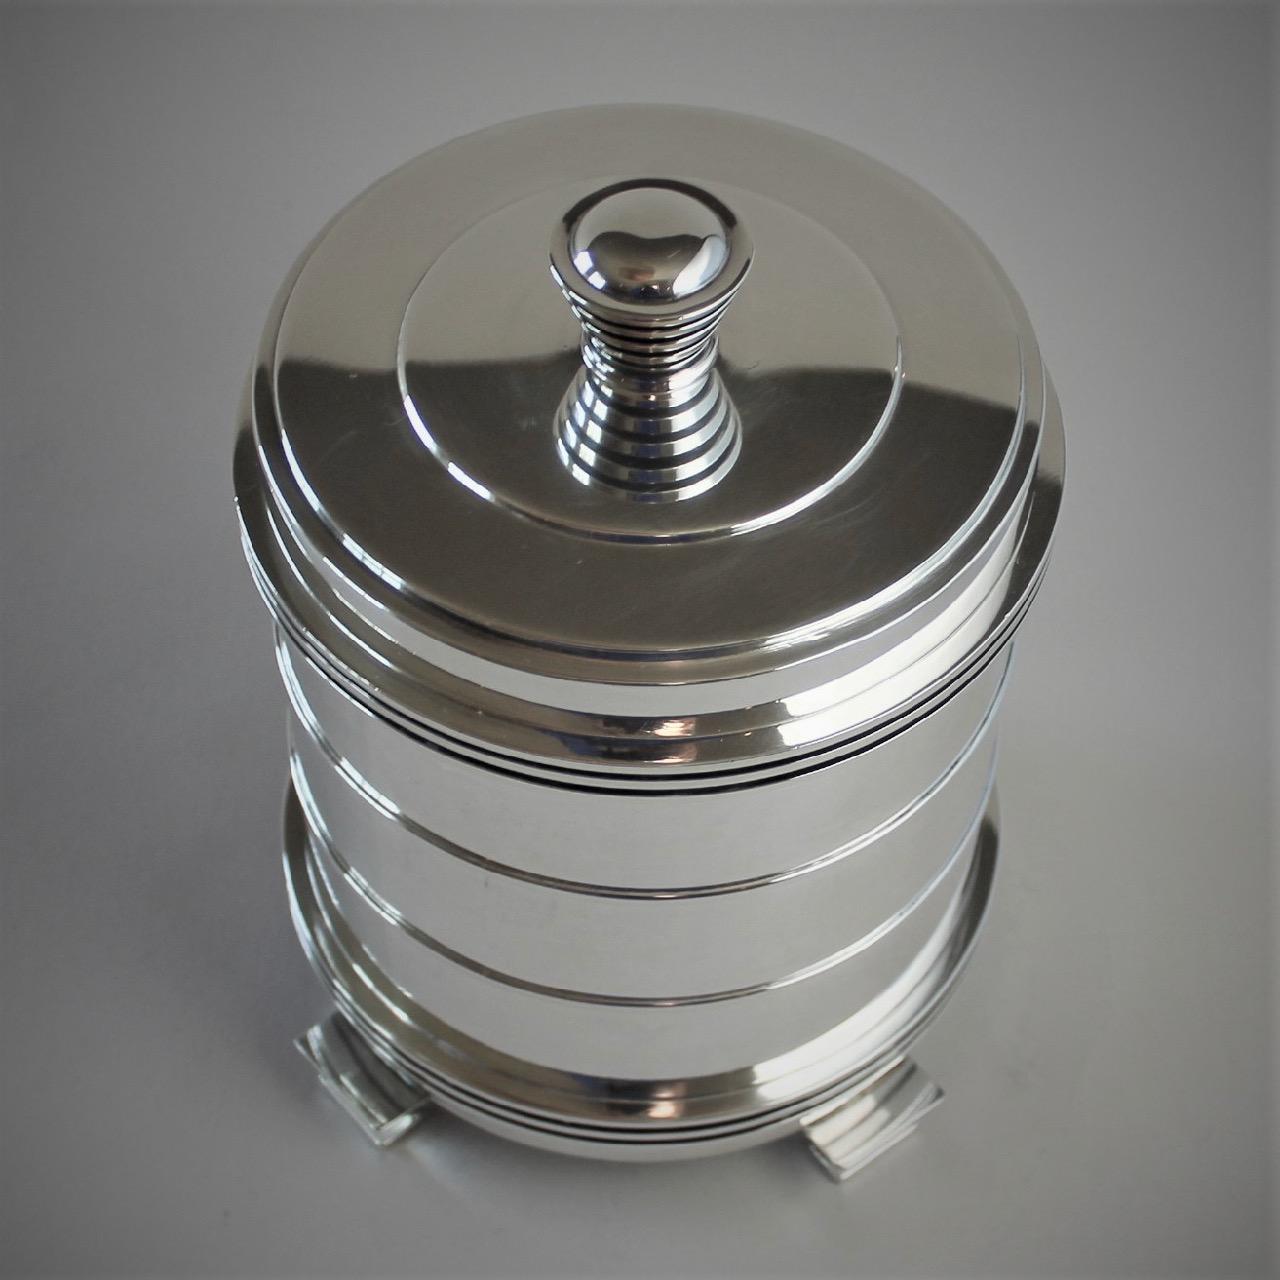 Georg Jensen sterling silver very rare tobacco jar, No.796 by Jorgen Jensen.

Important design defining the art deco period. Design from 1936. Hallmarks of the period.

A similar example can be seen in the book GEORG JENSEN HOLLOWARE, The Silver